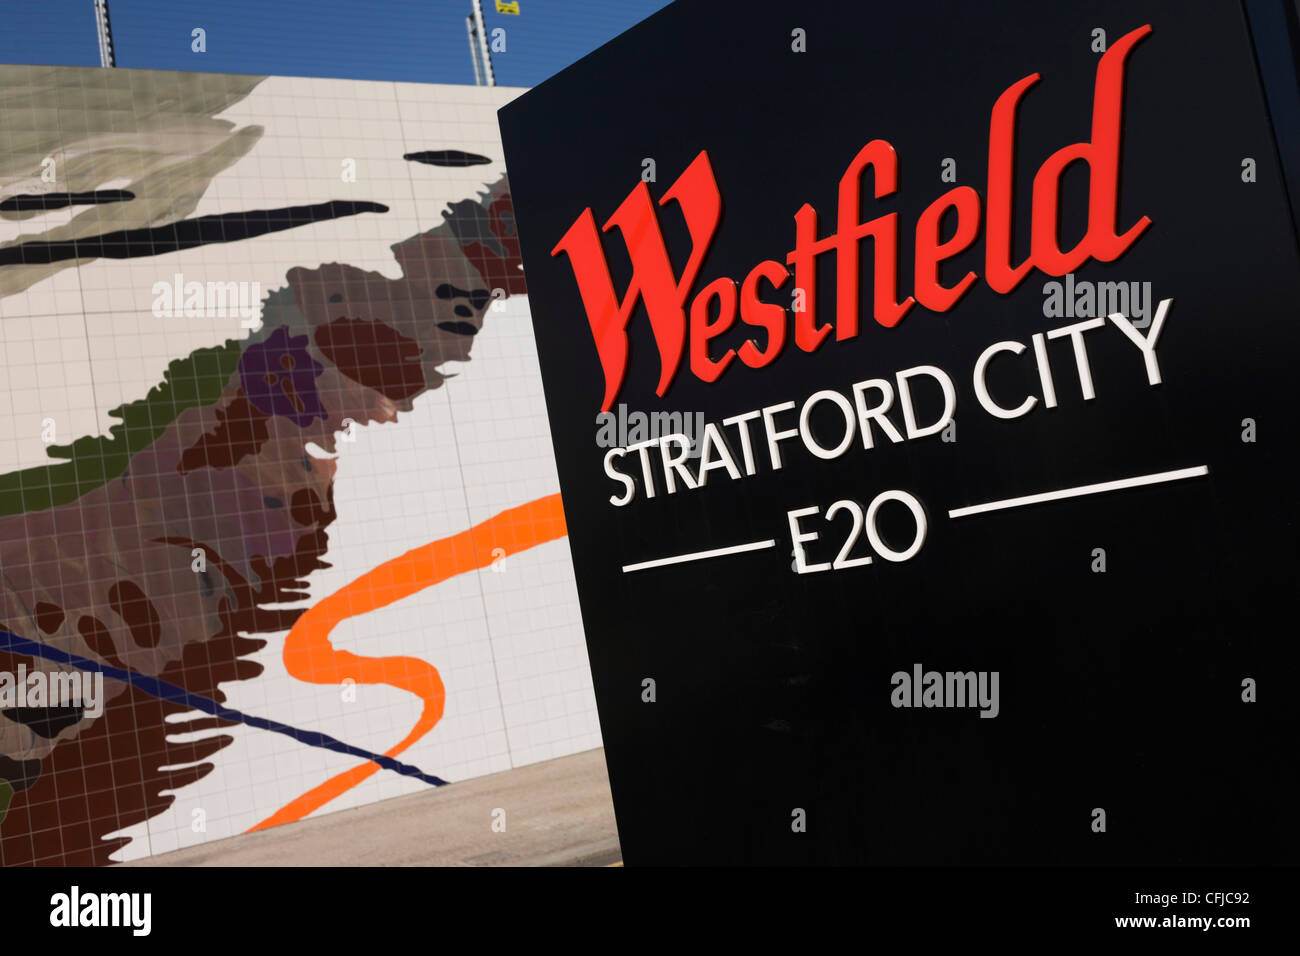 Boundary sign of the Westfield City shopping centre in Stratford, home of the 2012 Olympics. Situated on the fringe of the 2012 Olympic park, Westfield hosted its first day to thousands of shoppers eager to see Europe's largest urban shopping centre. Stock Photo